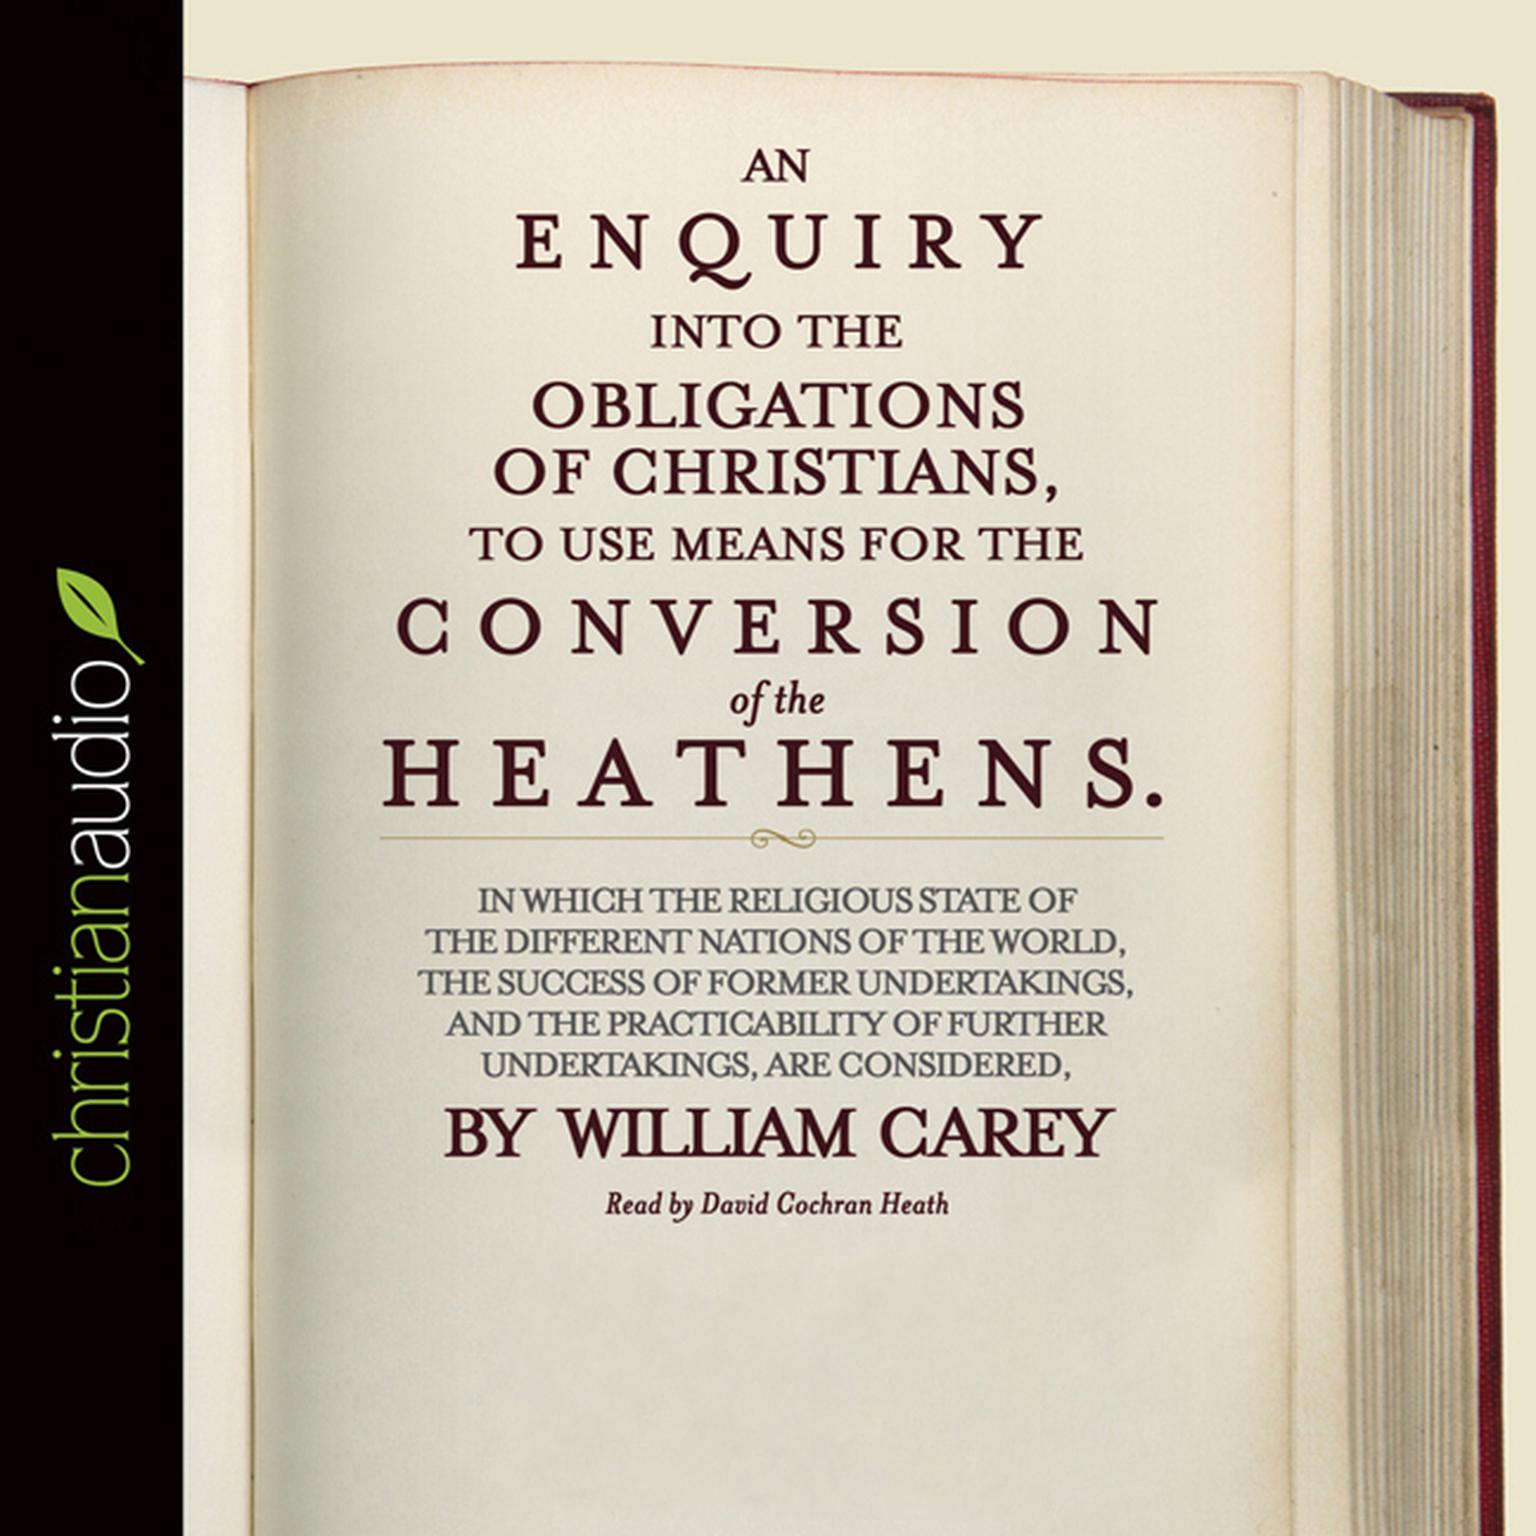 An Enquiry into the Obligations of Christians to Use Means for the Conversion of the Heathens: In Which the Religious State of the Different Nations of the World, the Success of Former Undertakings, and the Practicability of Further Undertakings are Considered Audiobook, by William Carey